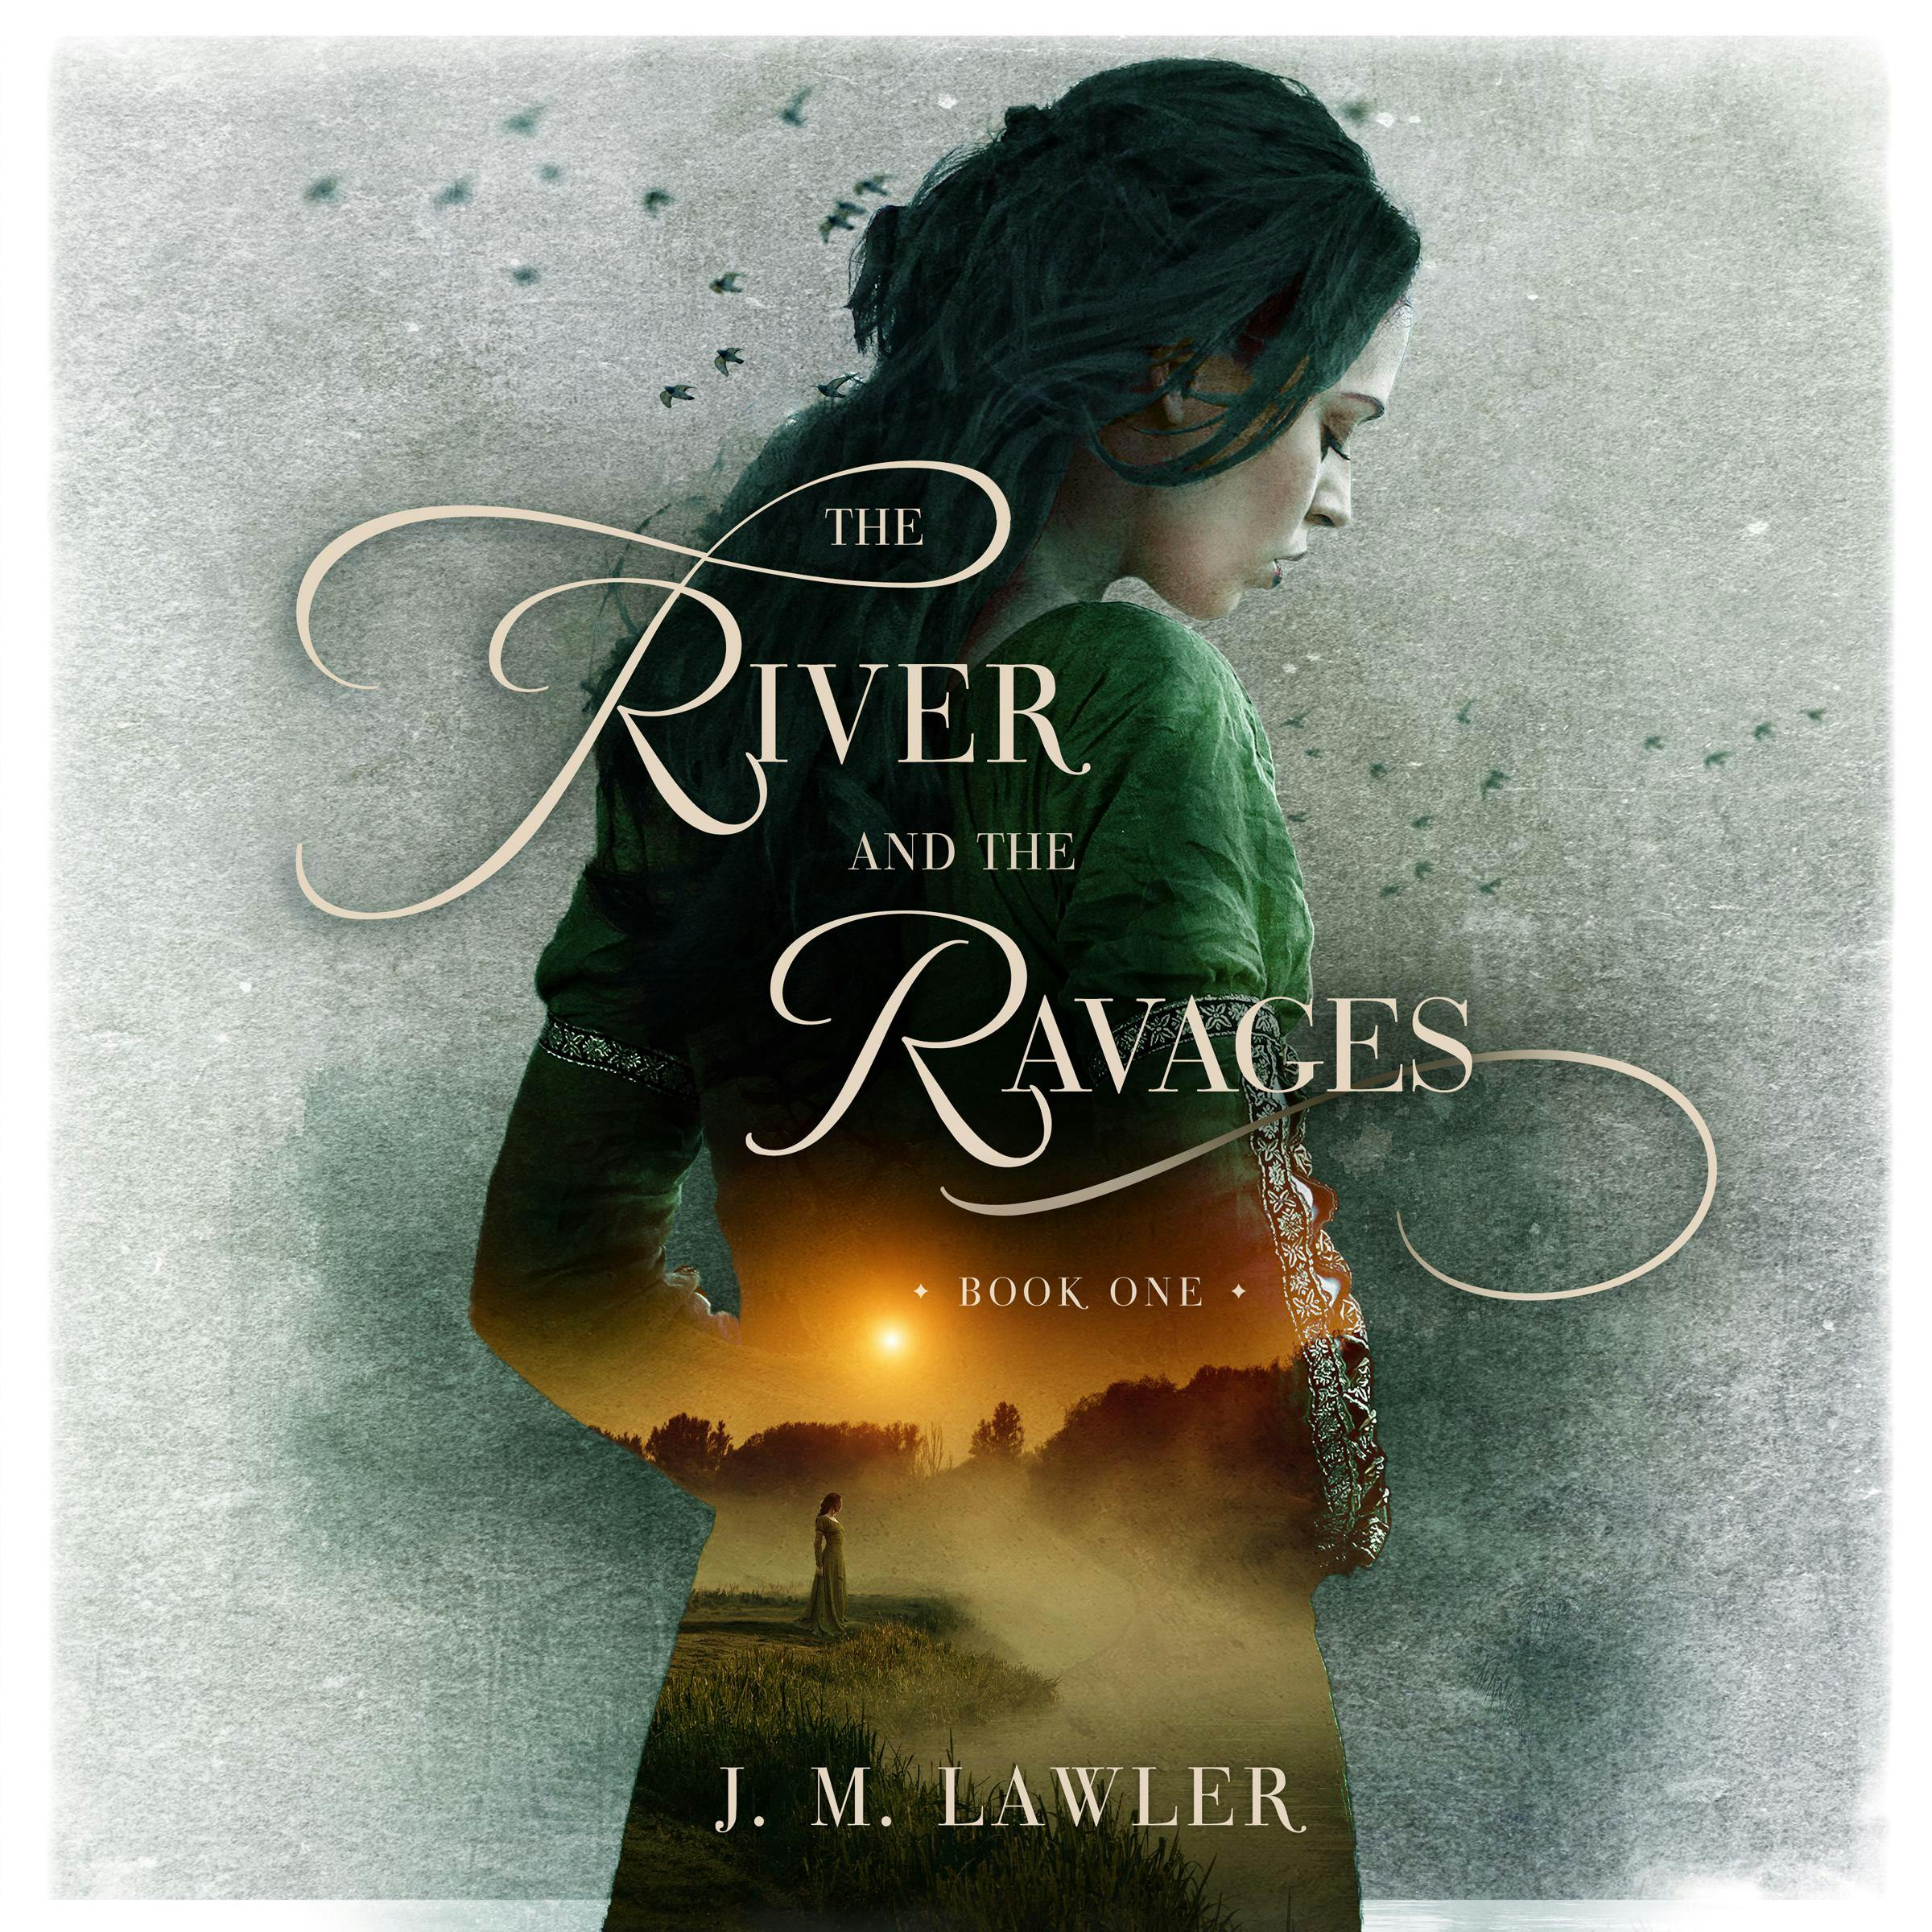 The River and the Ravages - J M Lawler